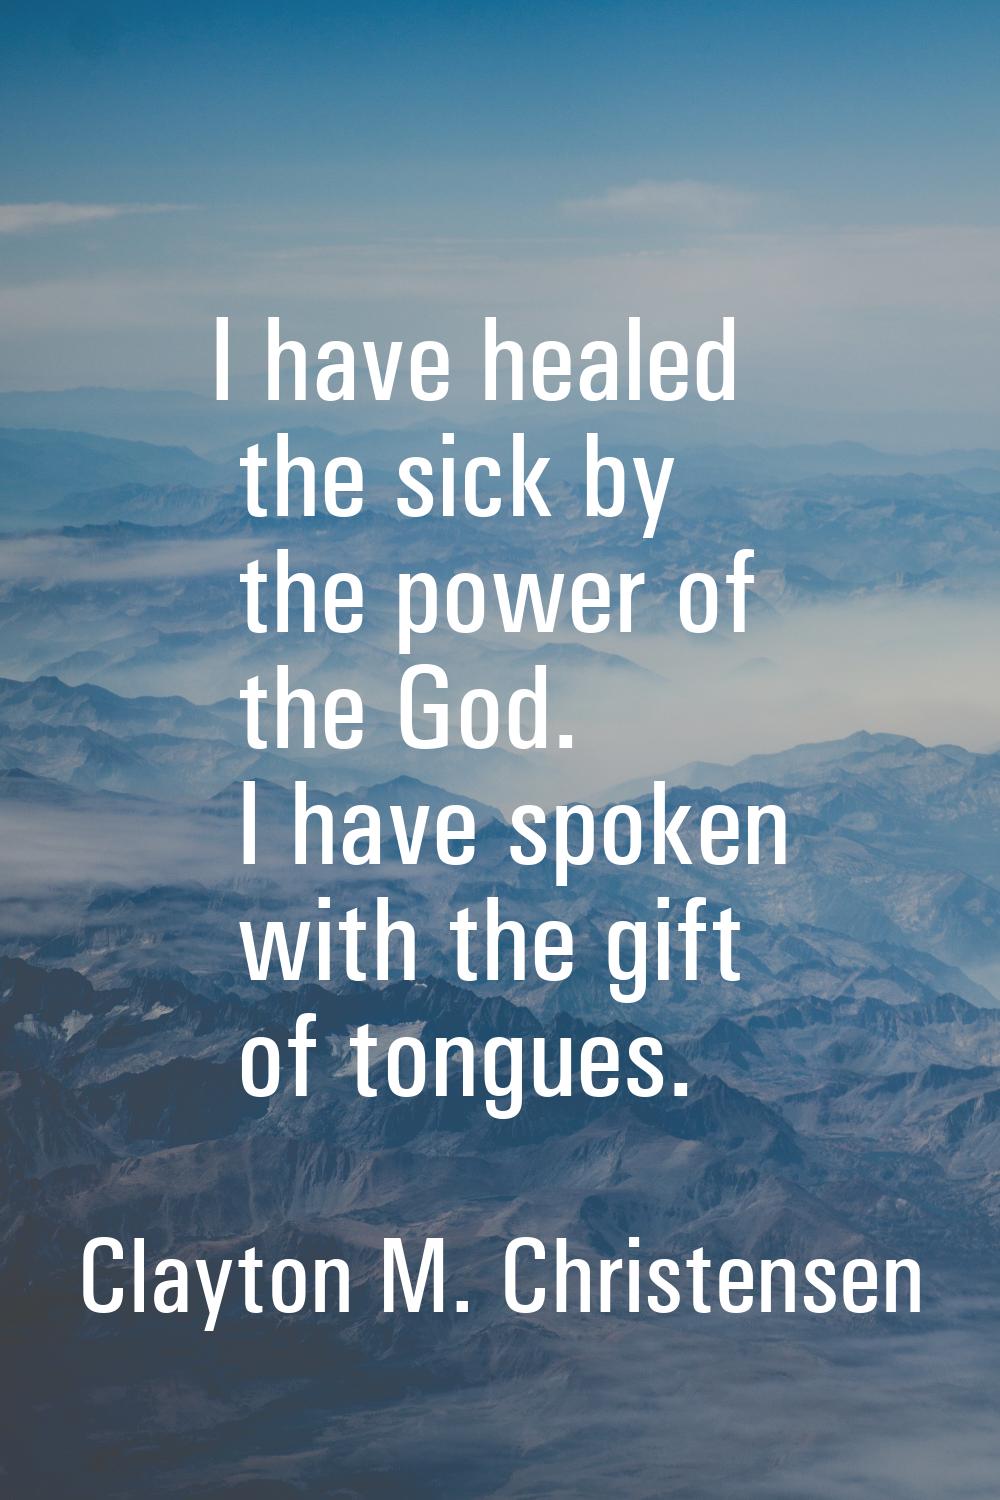 I have healed the sick by the power of the God. I have spoken with the gift of tongues.